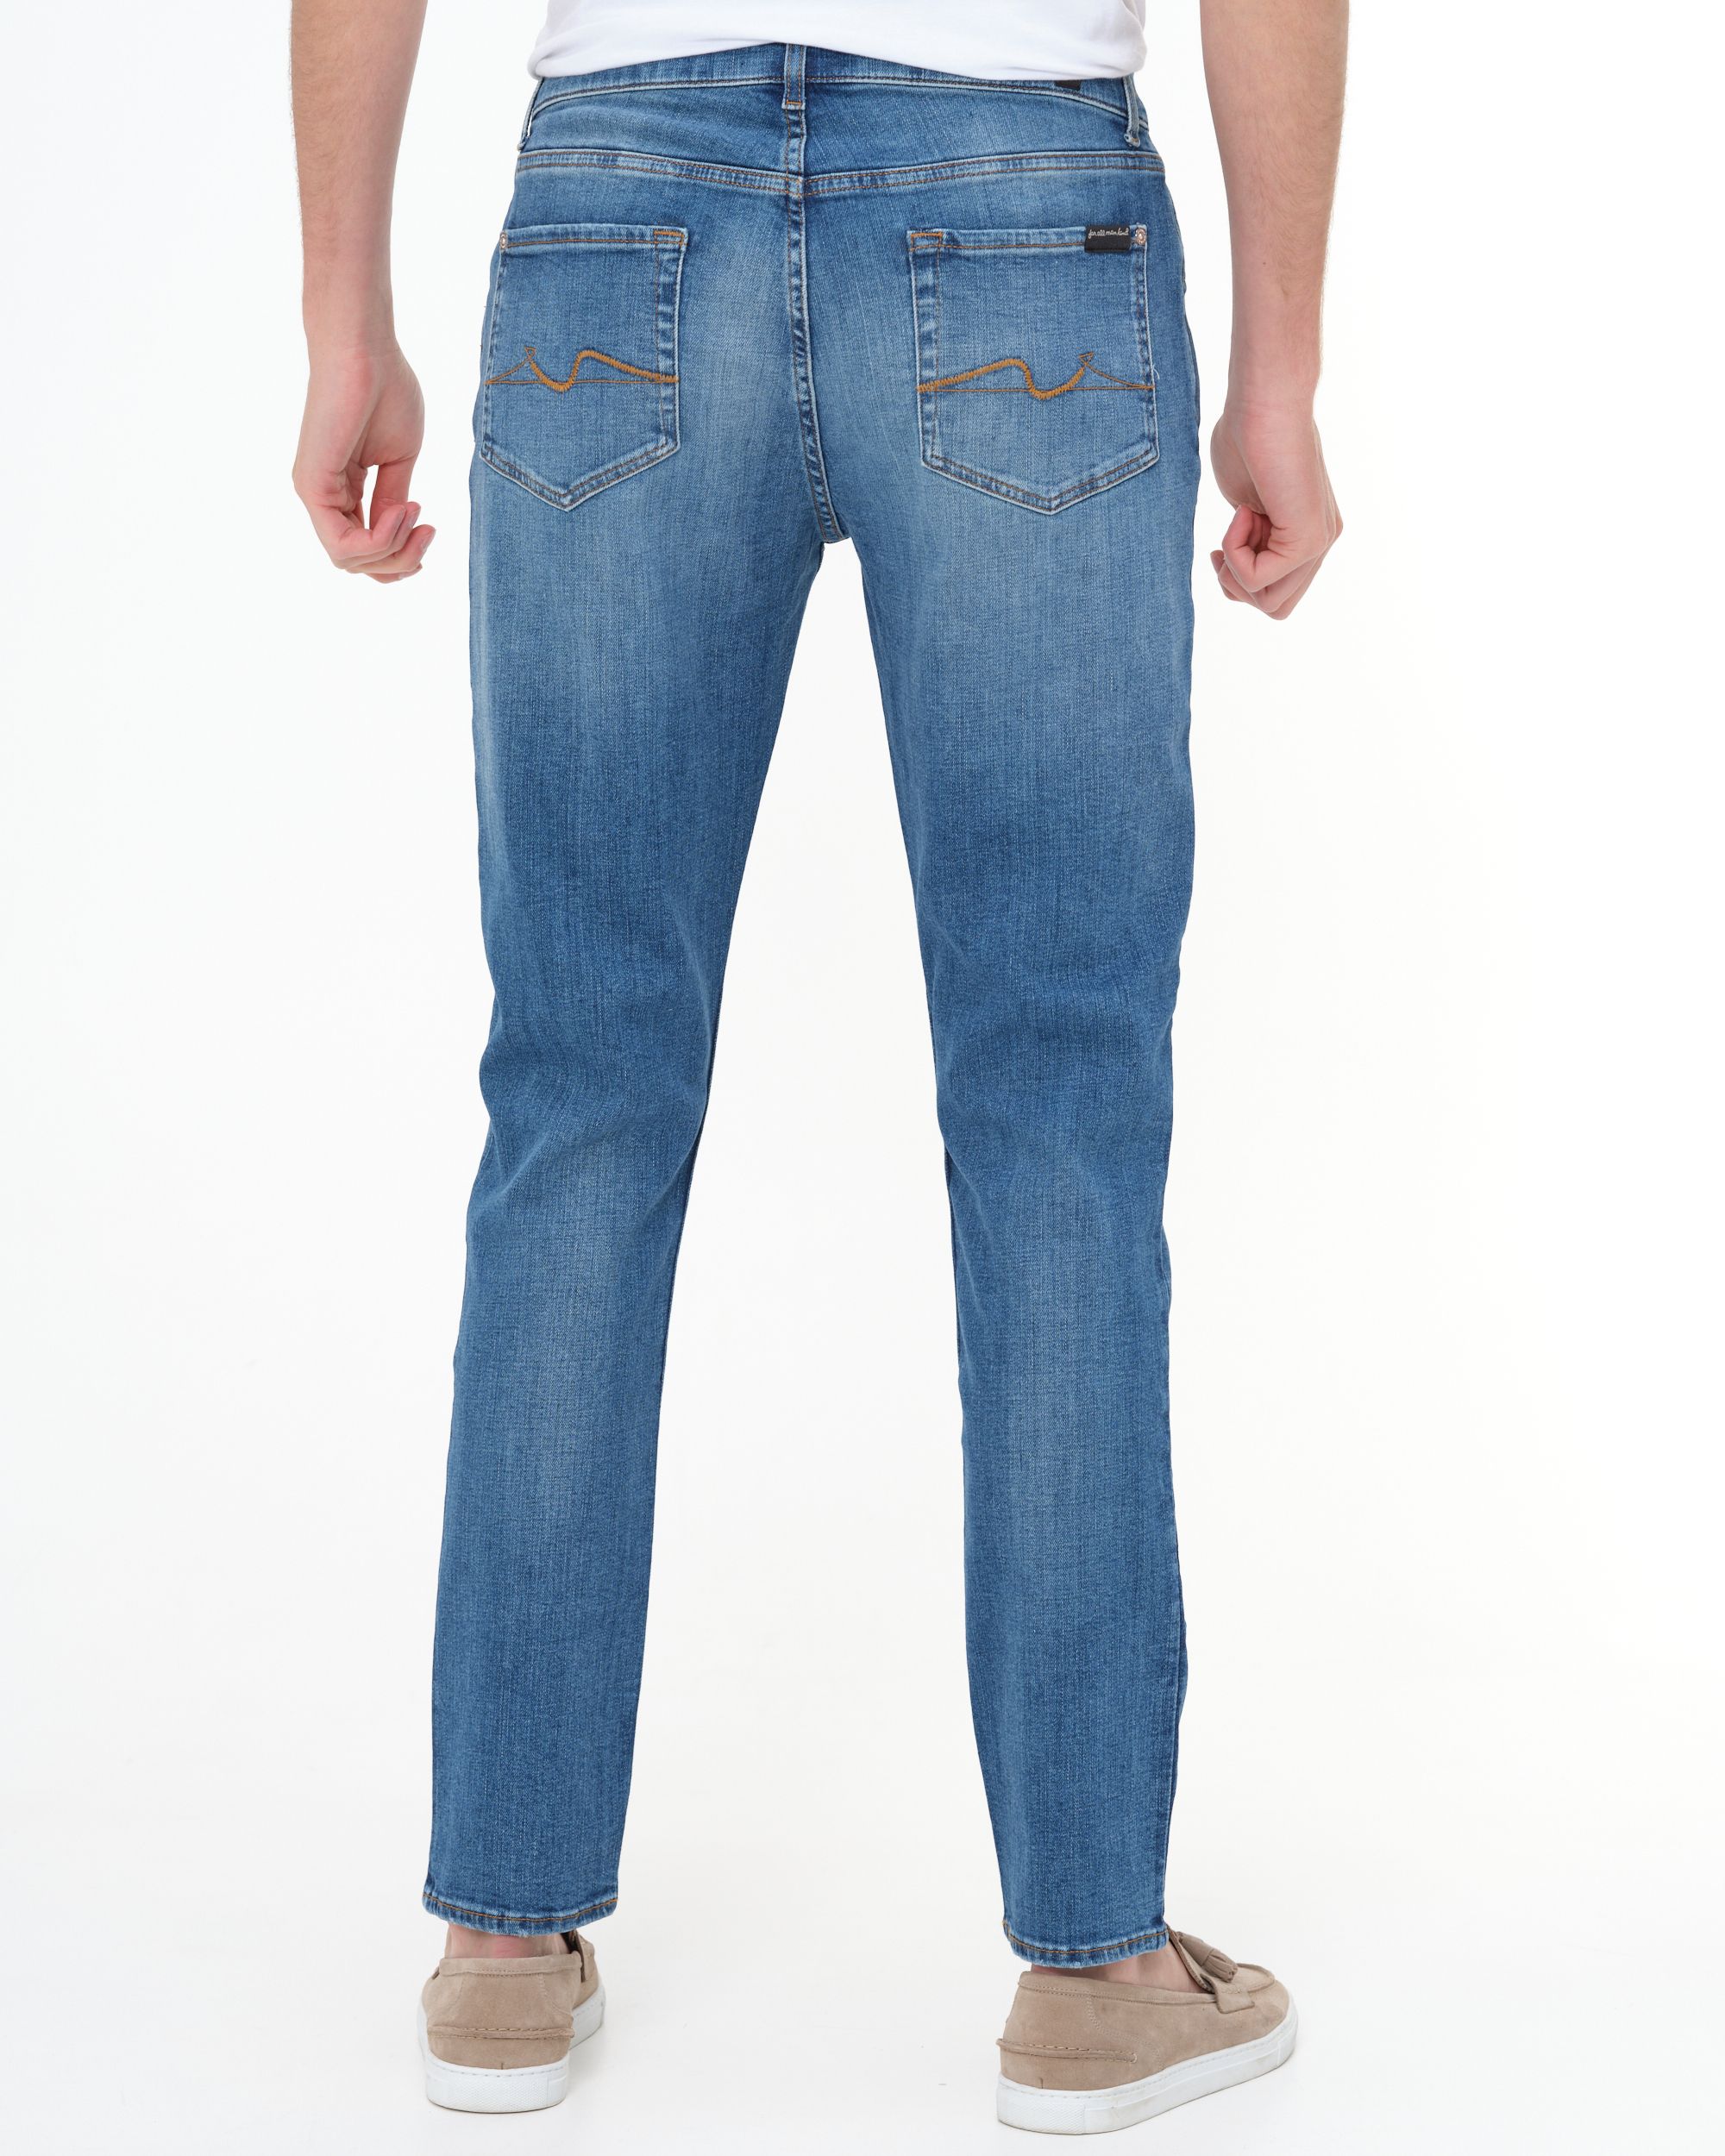 Seven for all Mankind Jeans Blauw 081444-001-30